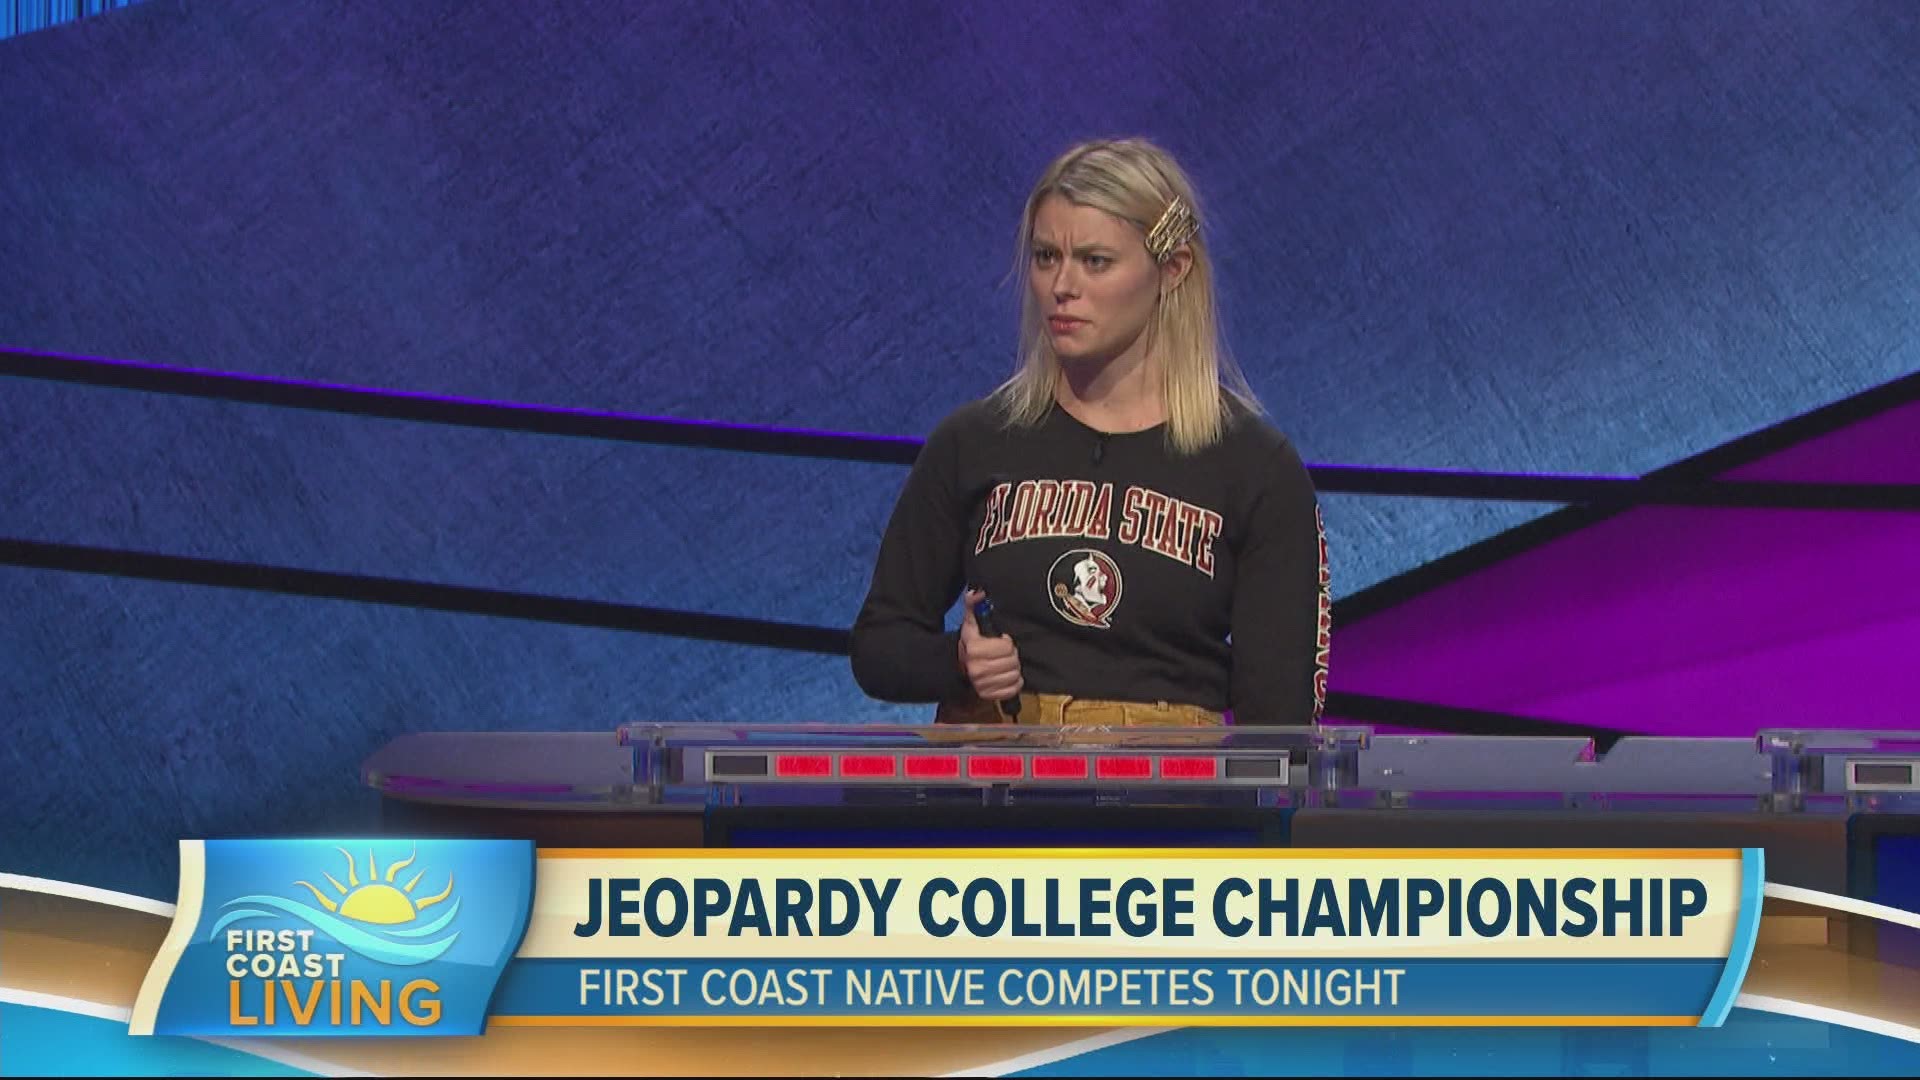 First Coast native competes in Jeopardy College Championship.